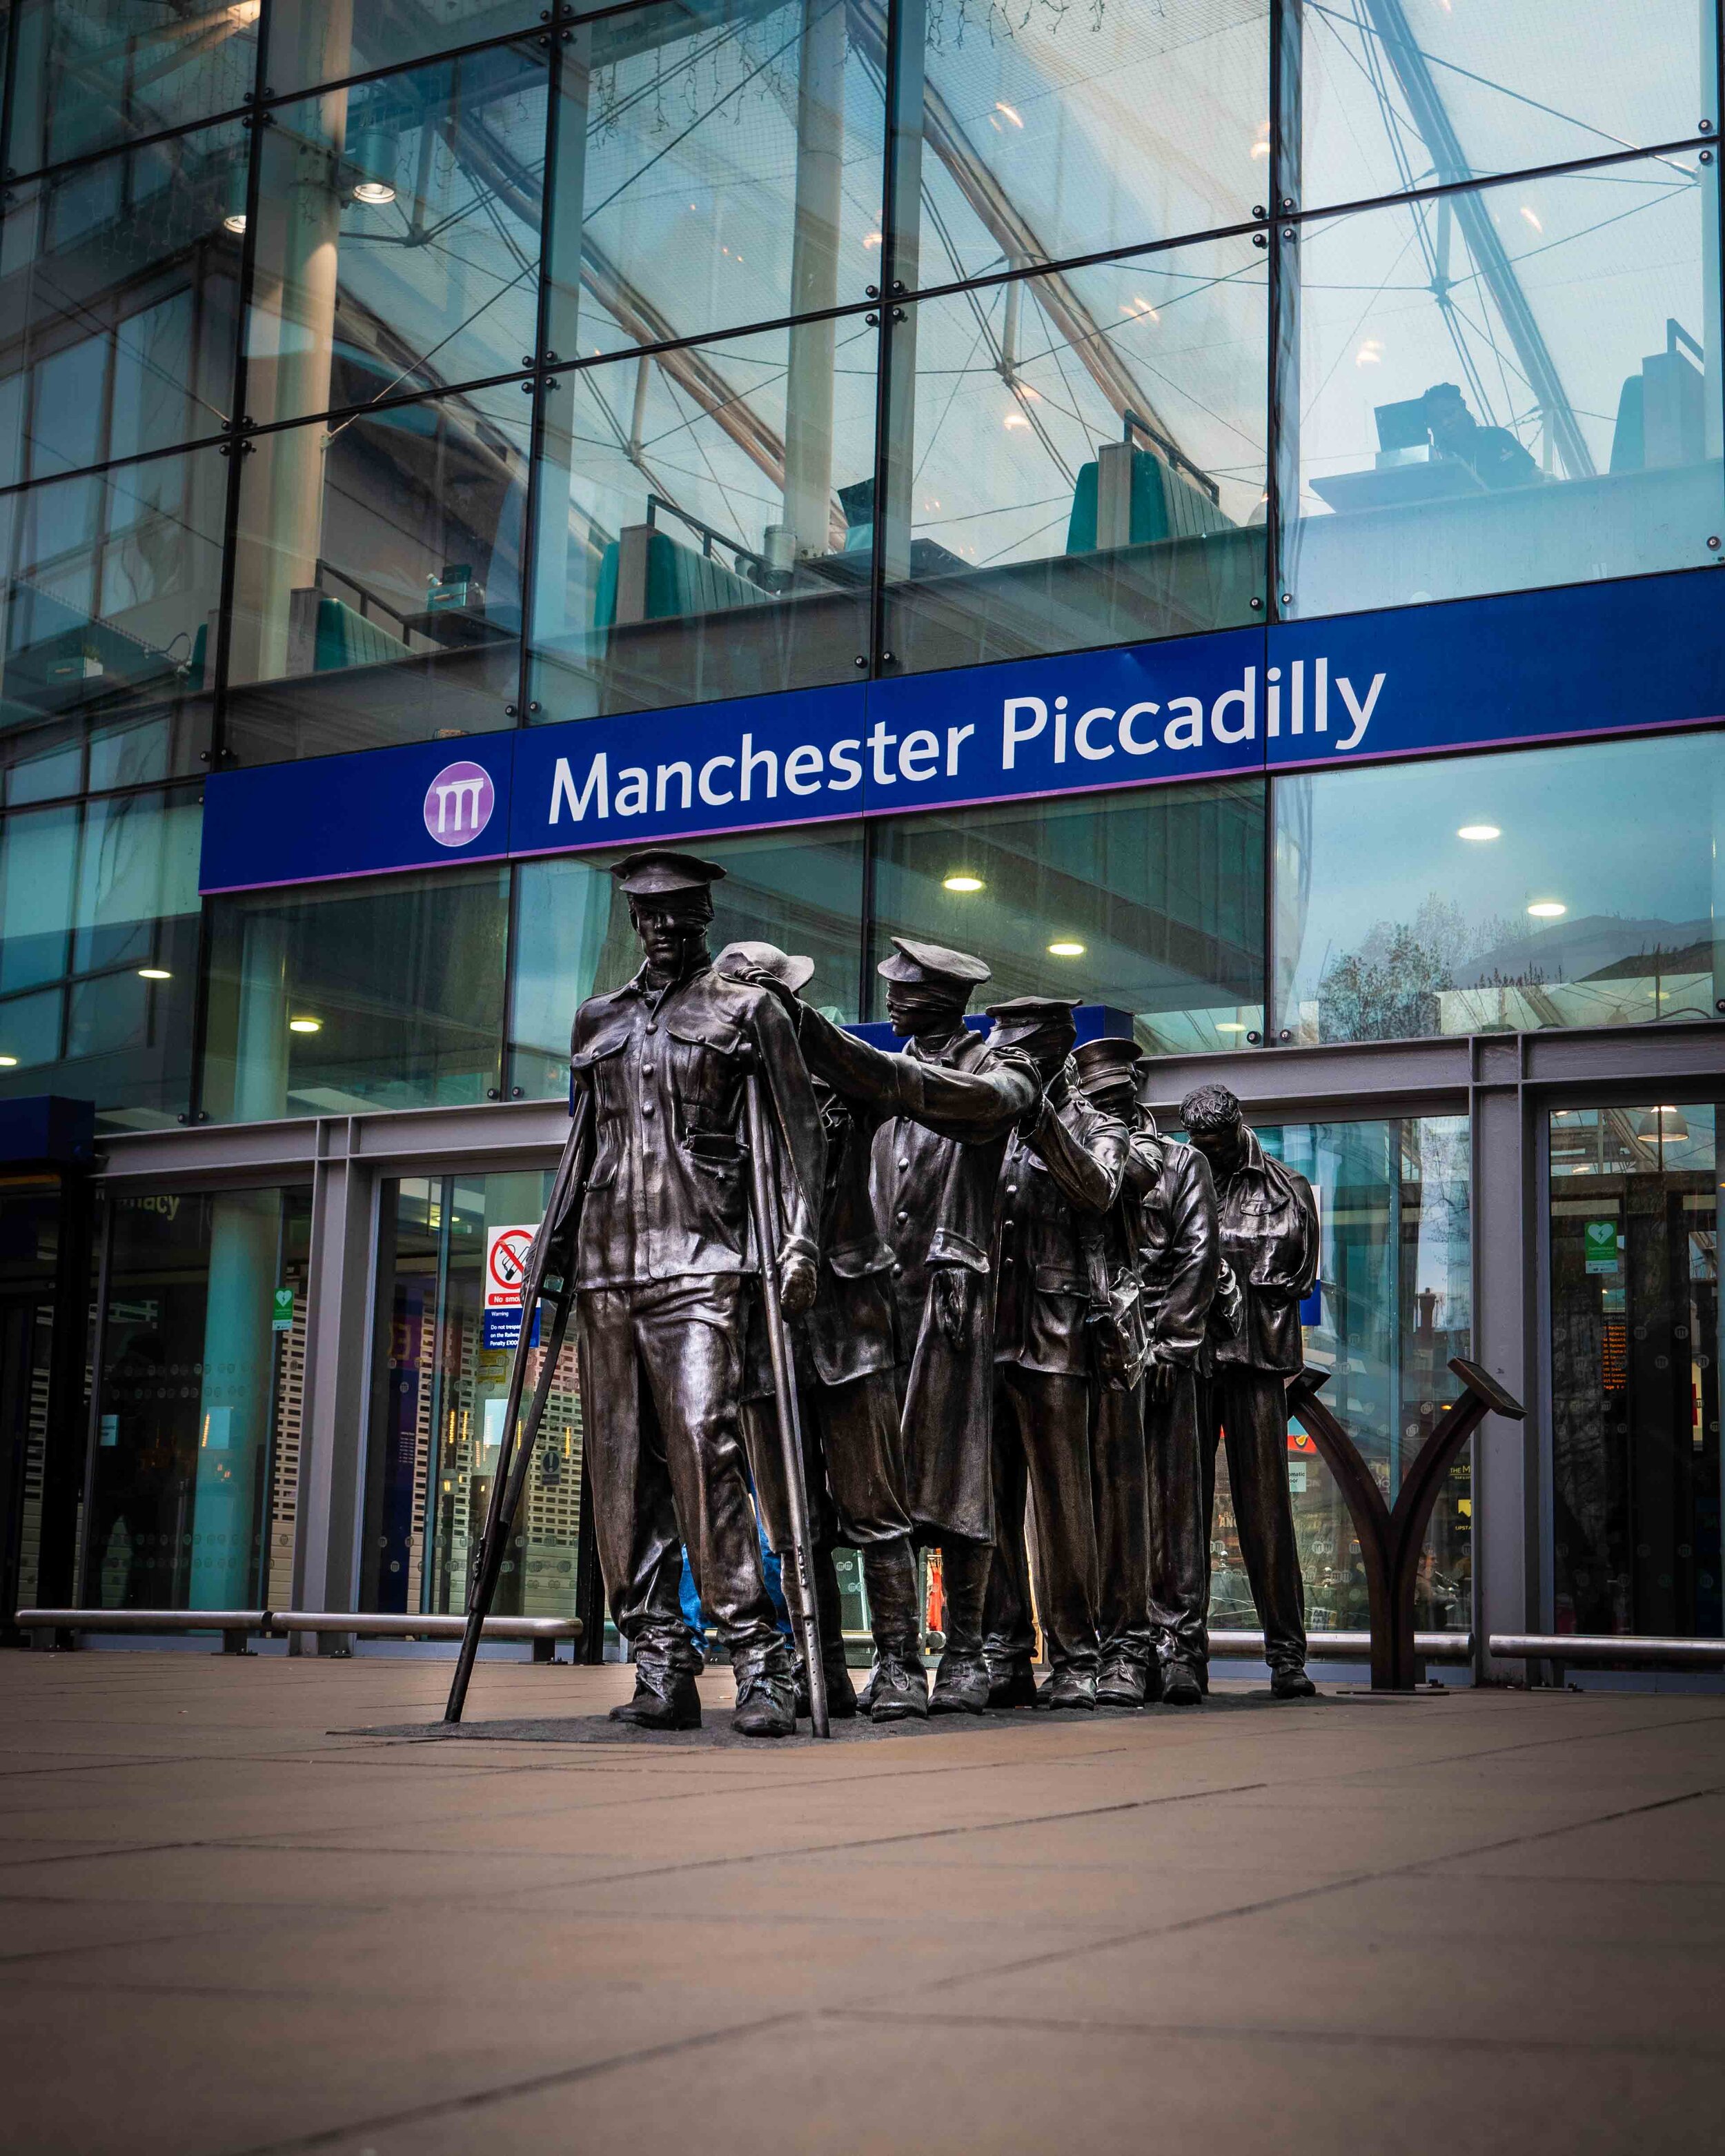 Blind statues outside of Manchester Piccadilly train station, free stock photography.jpg